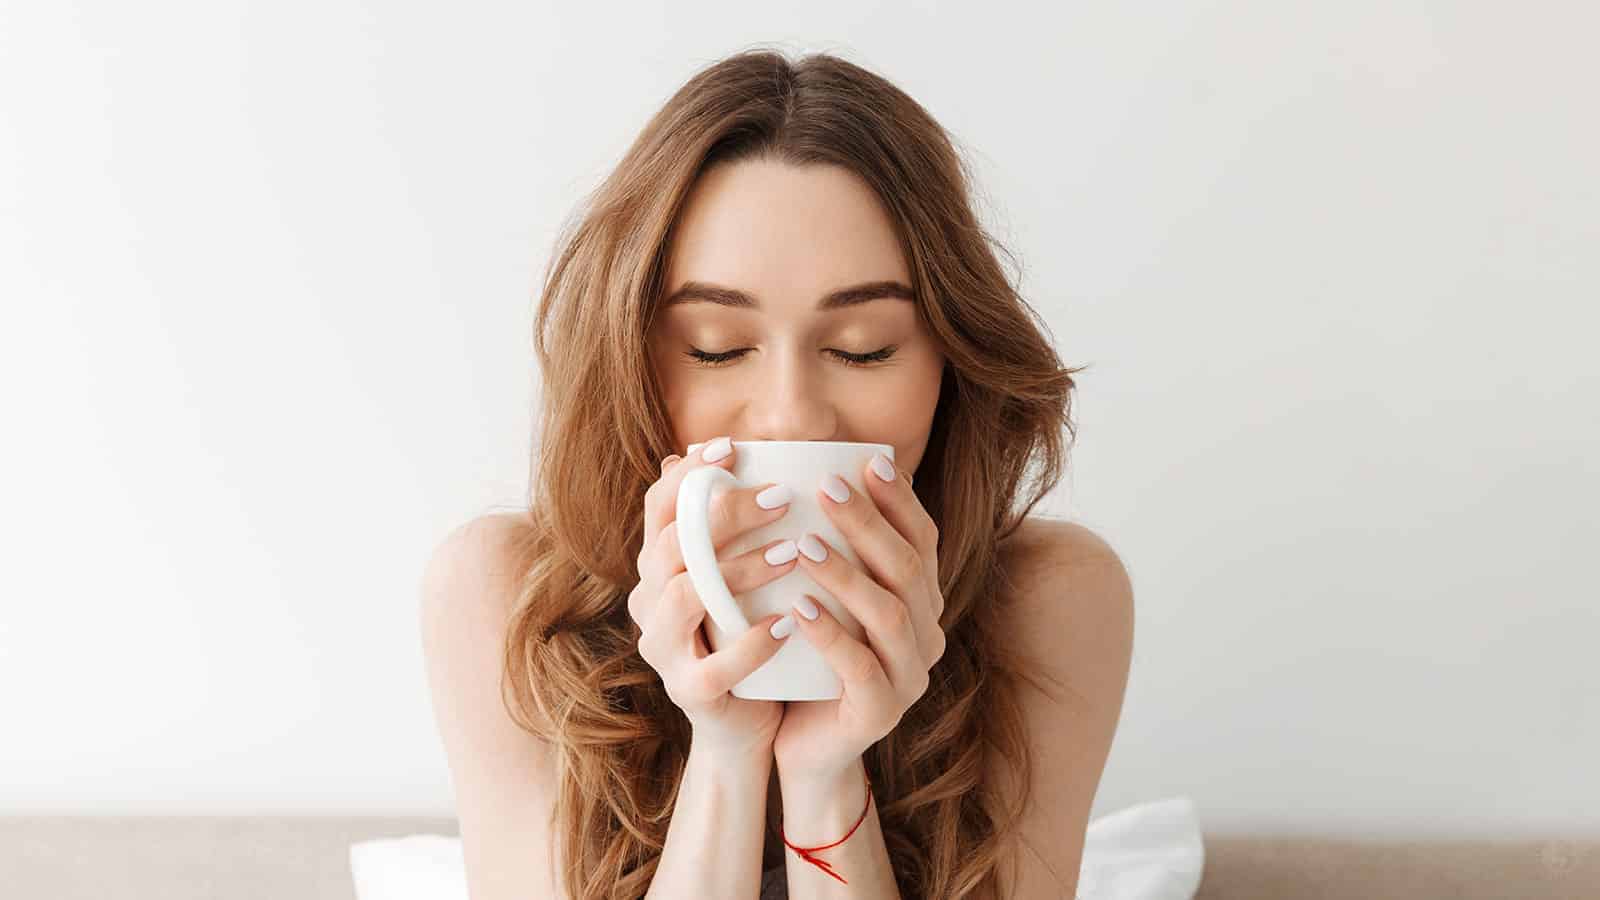 6 Morning Energy Drinks That Wake You Up Better Than Coffee